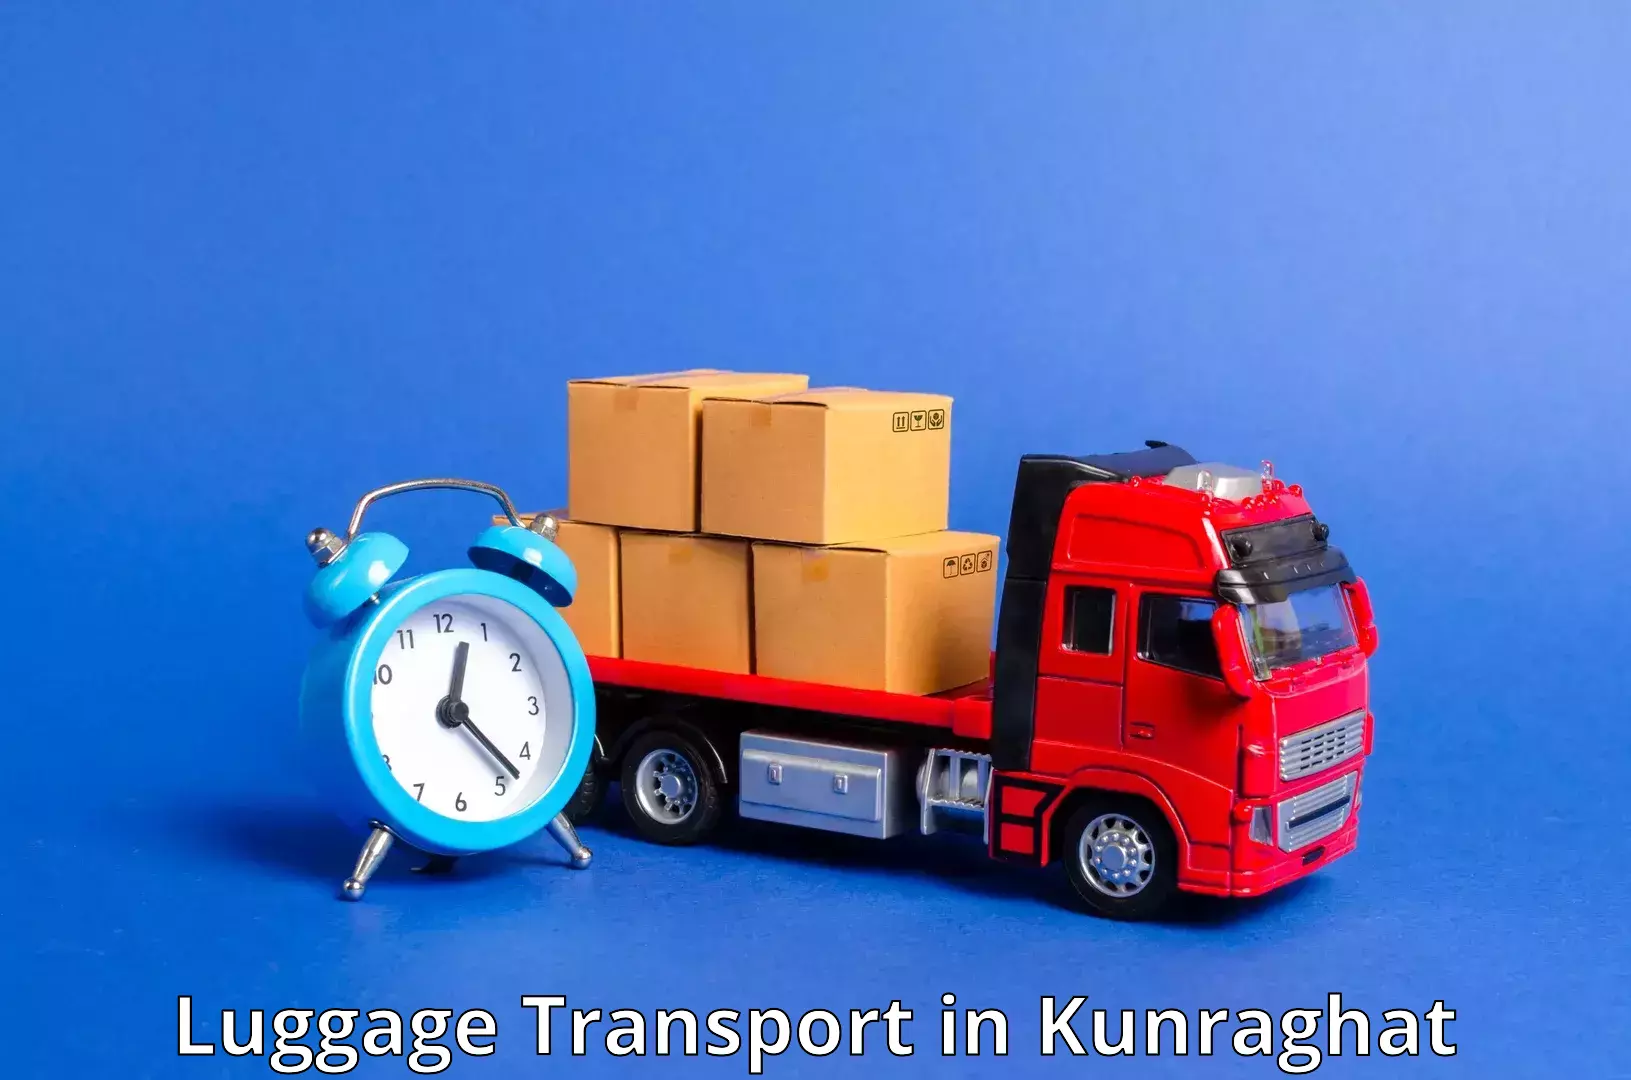 Luggage delivery logistics in Kunraghat